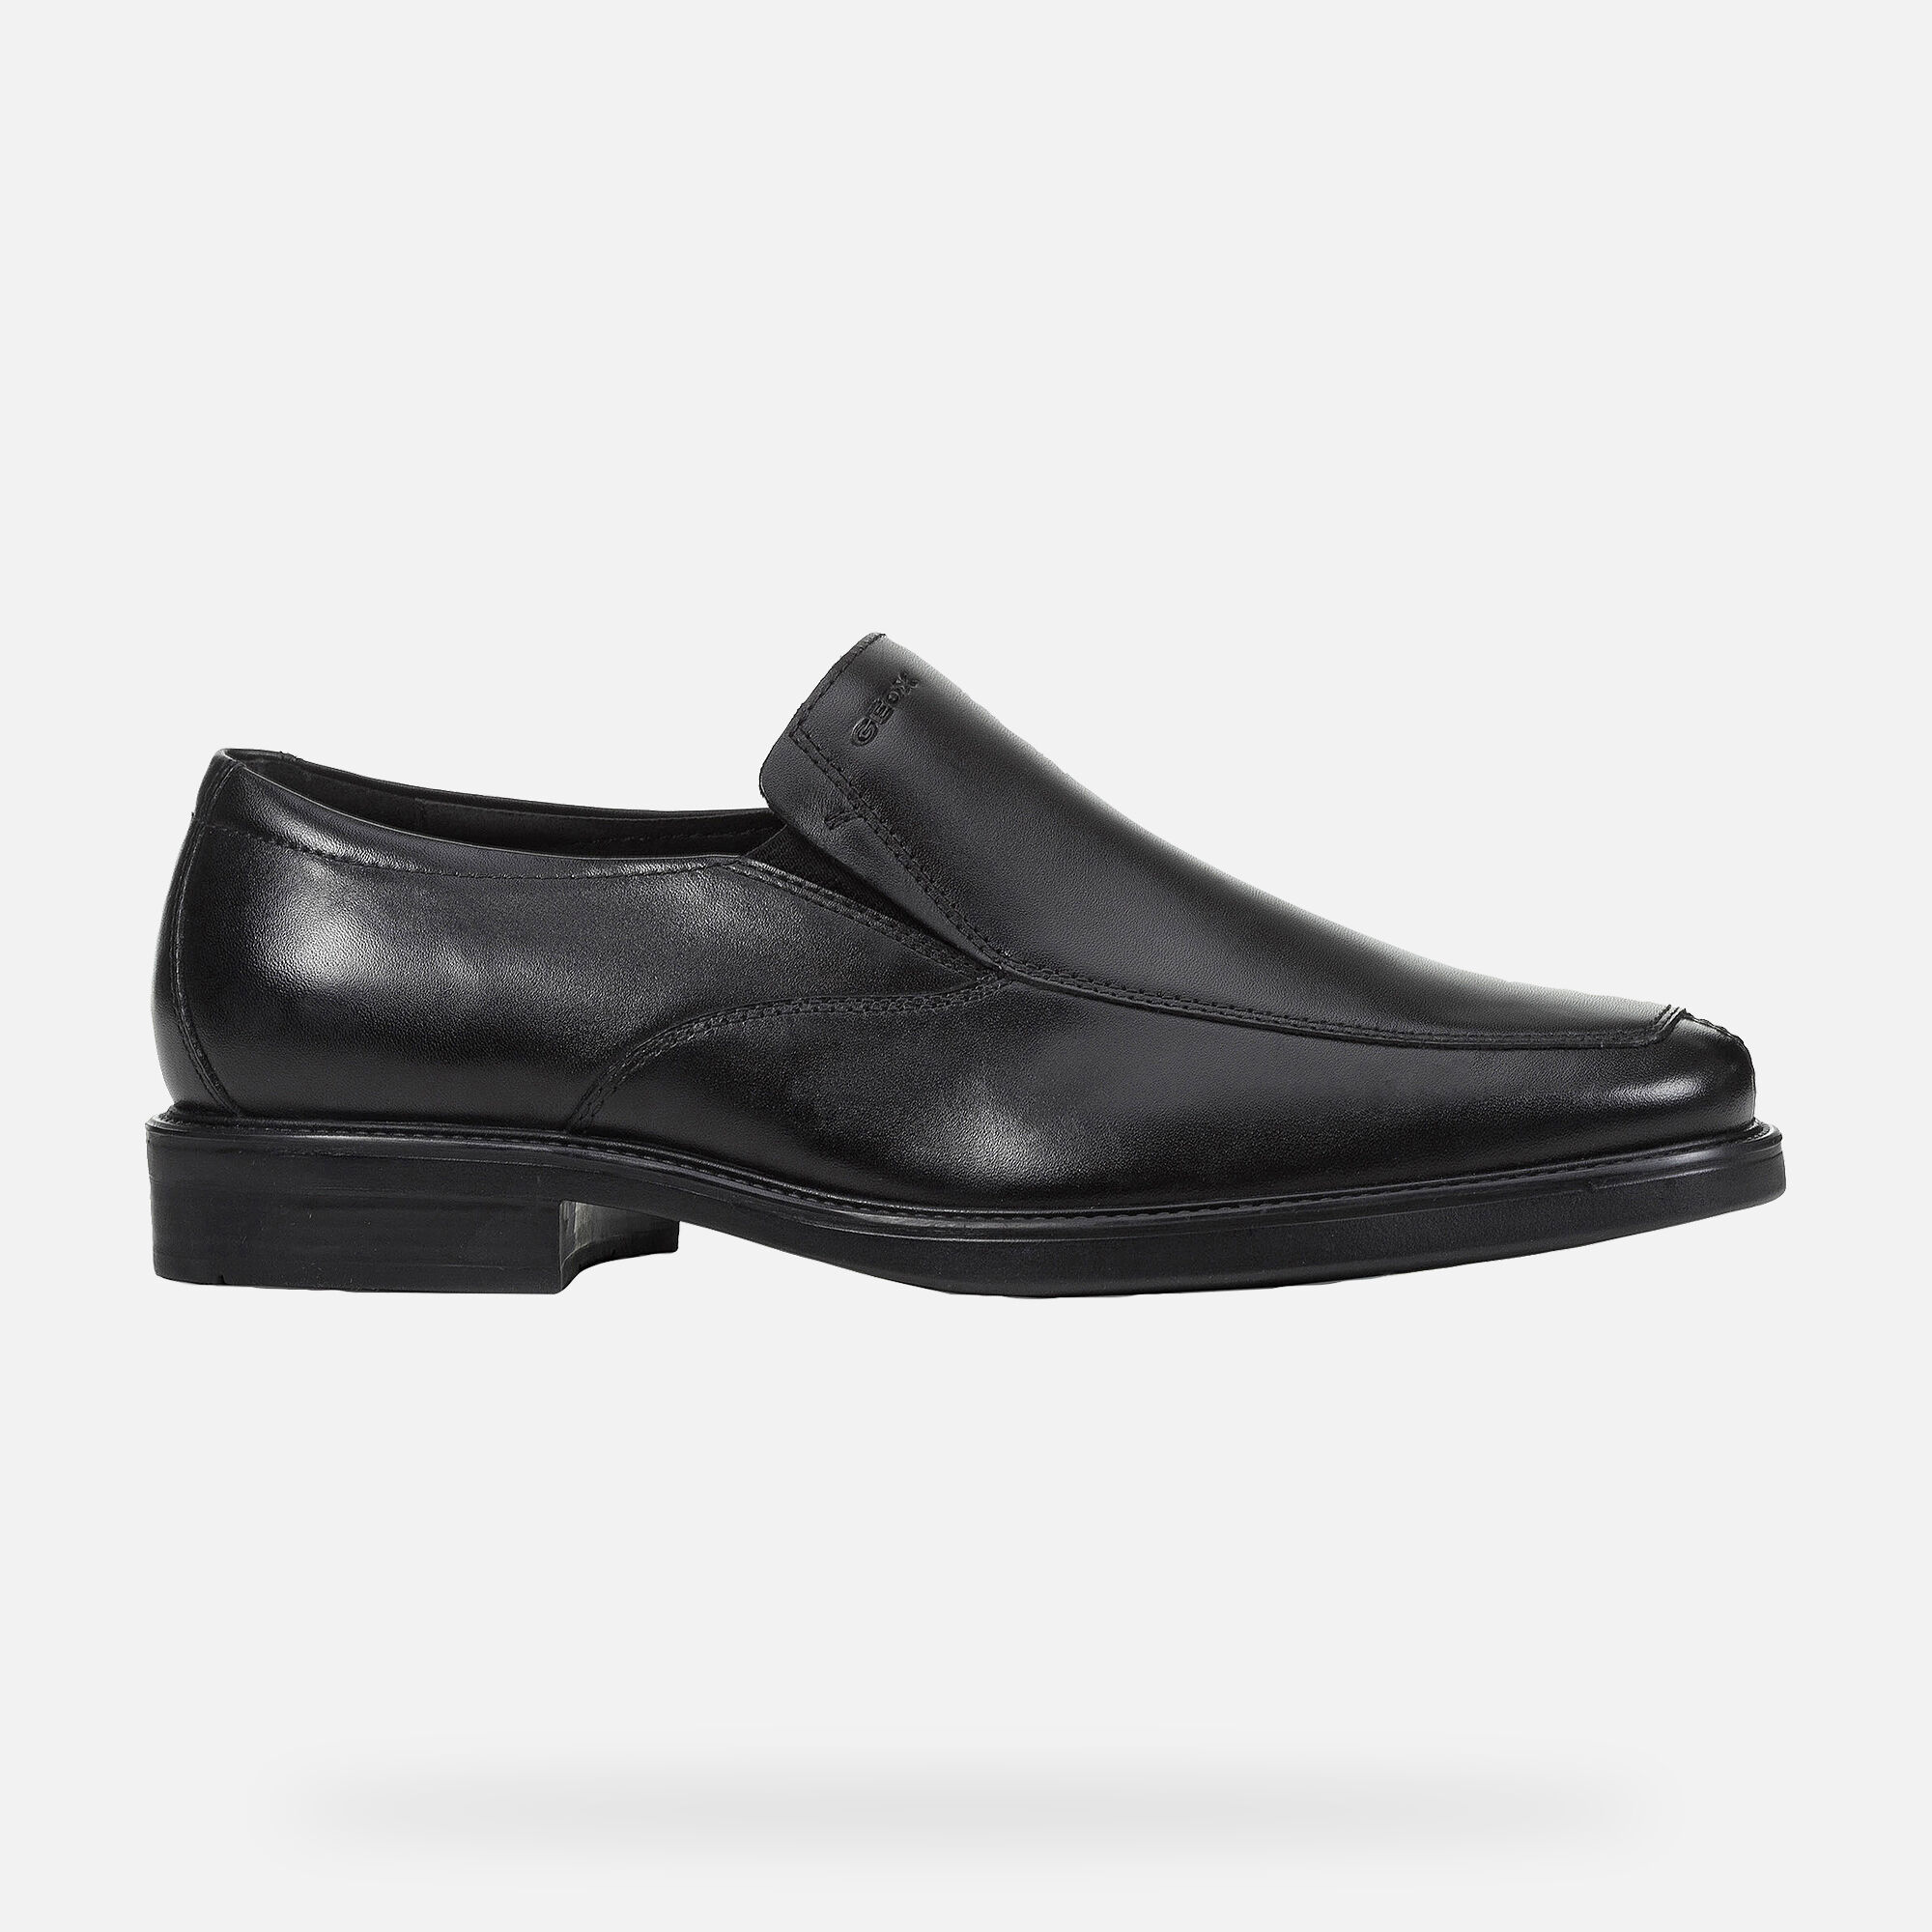 geox black leather shoes